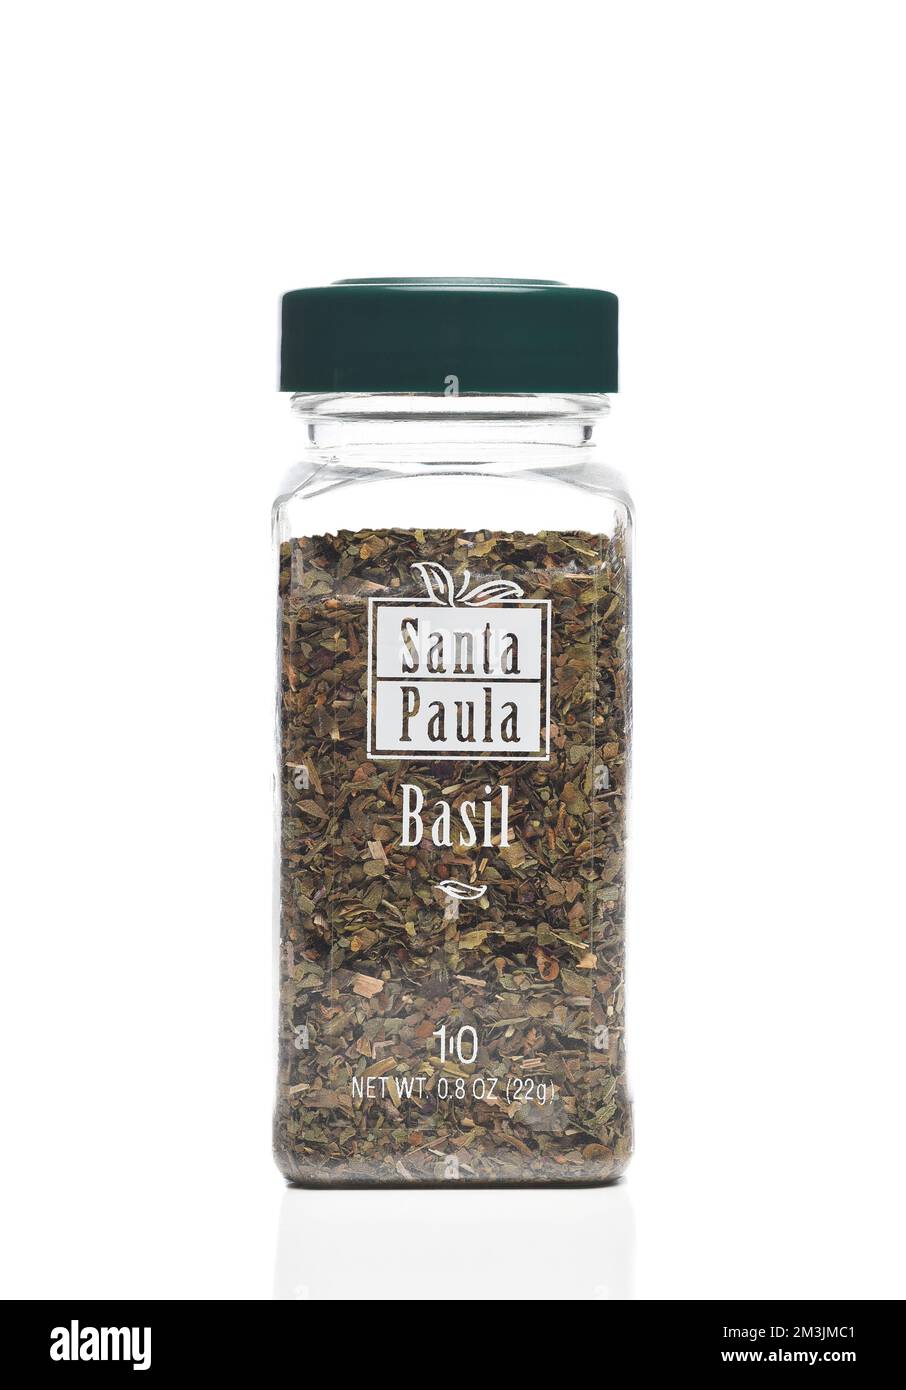 IRVINE, CALIFORNIA - 15 DEC 2022: A bottle of Santa Paula Basil, an aromatic annual herb used in cooking. Stock Photo